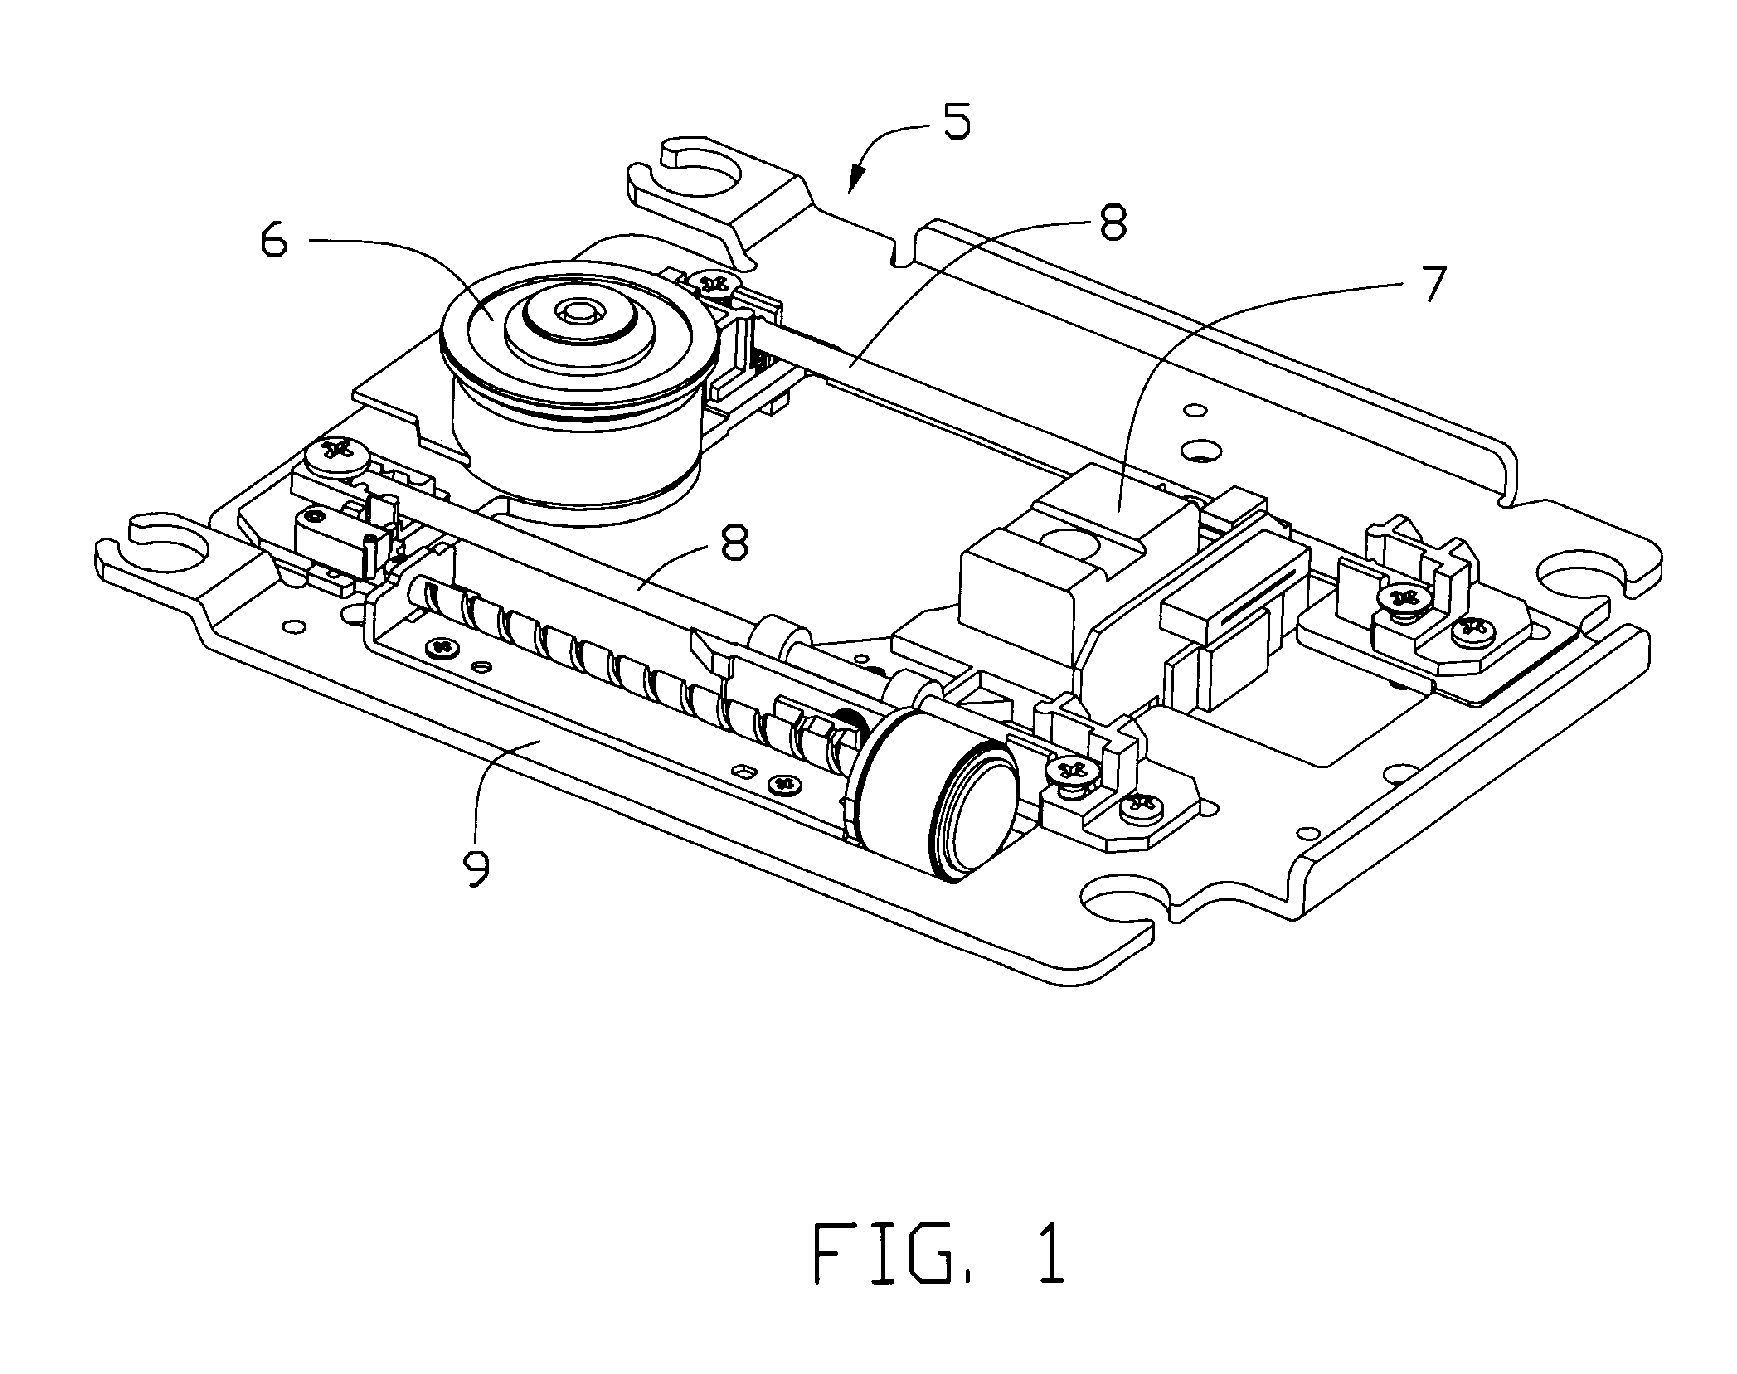 Traverse module for disc apparatus with tilt adjustable spindle motor